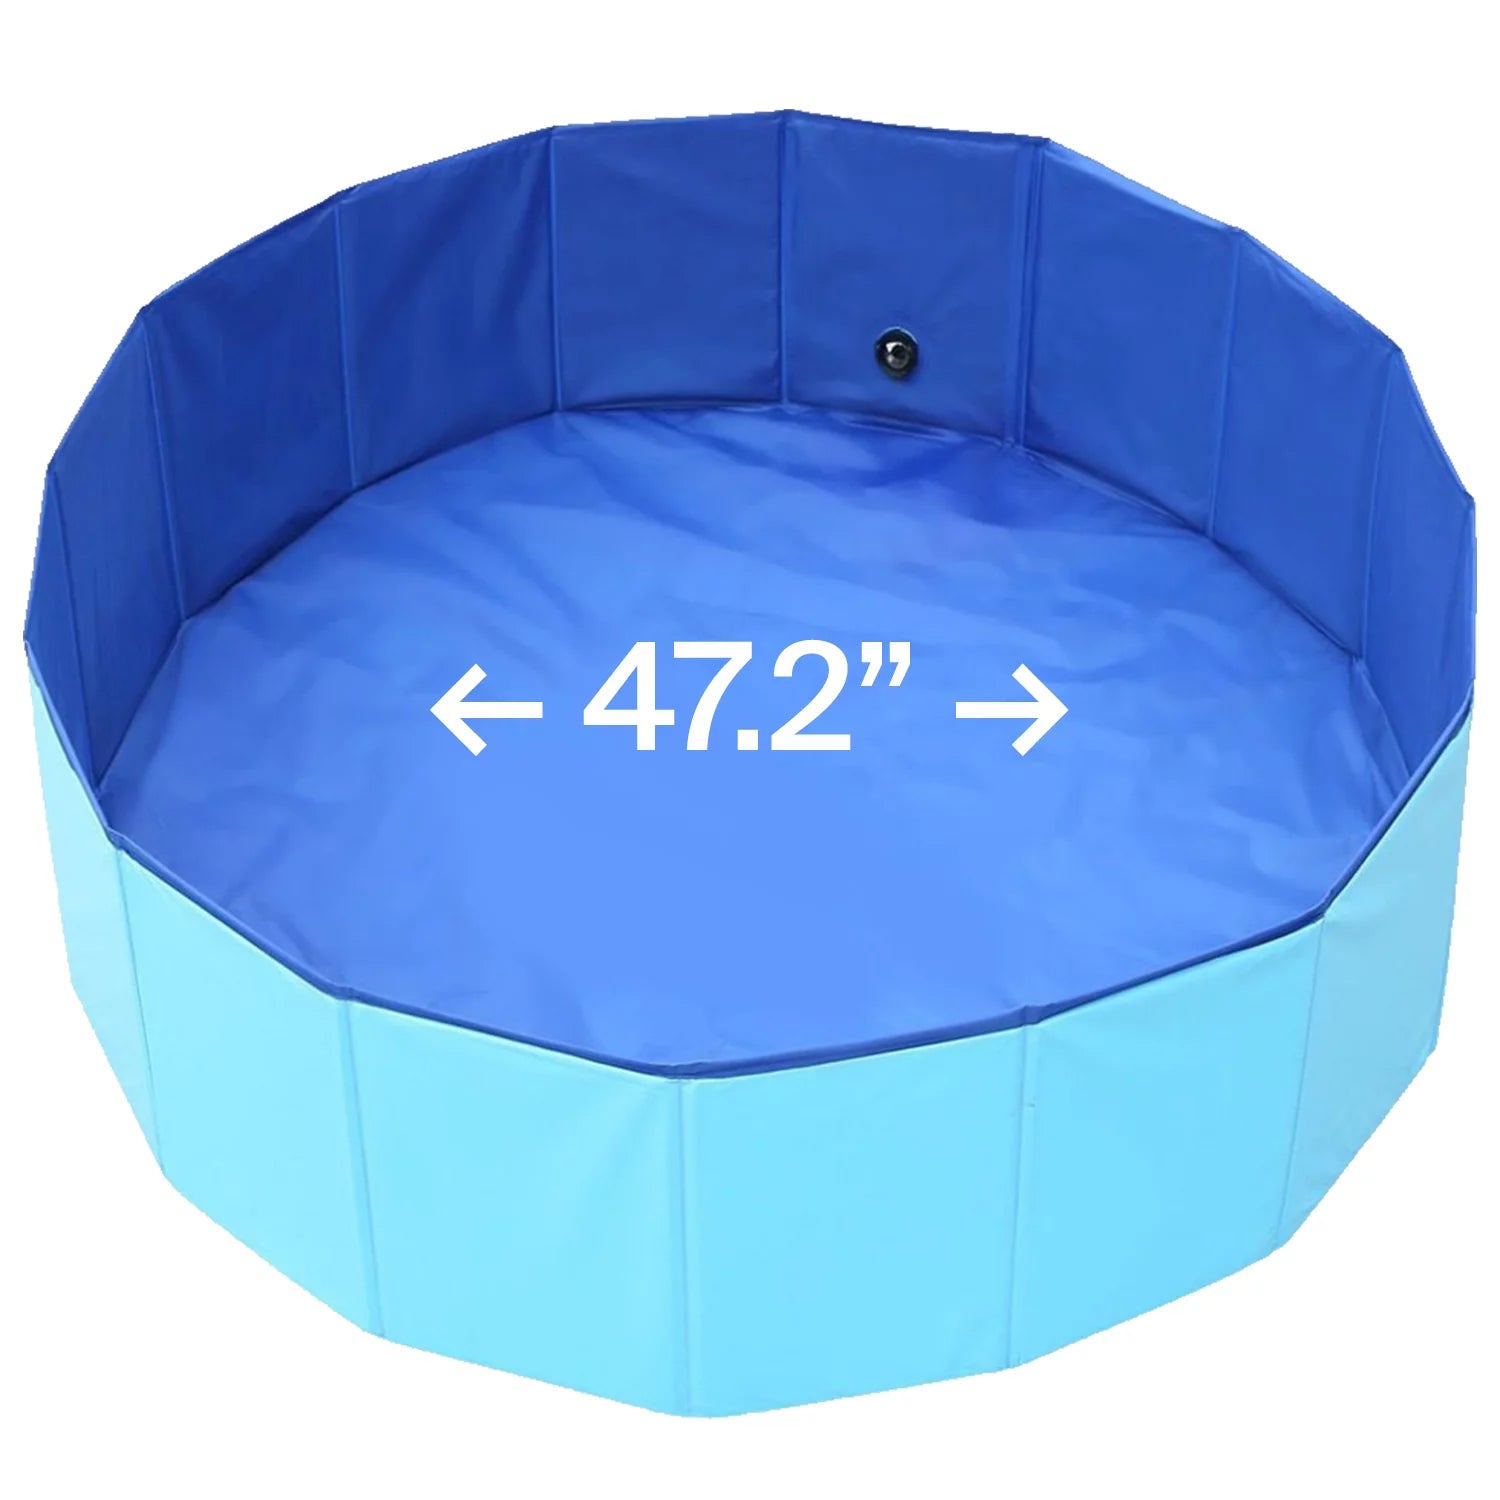 47.2" Foldable Hard Plastic Kiddie Baby Dog Pet Bath Swimming Pool Collapsible Dog Pet Pool Bathing Tub Kiddie Pool for Kids Pets Dogs Cats